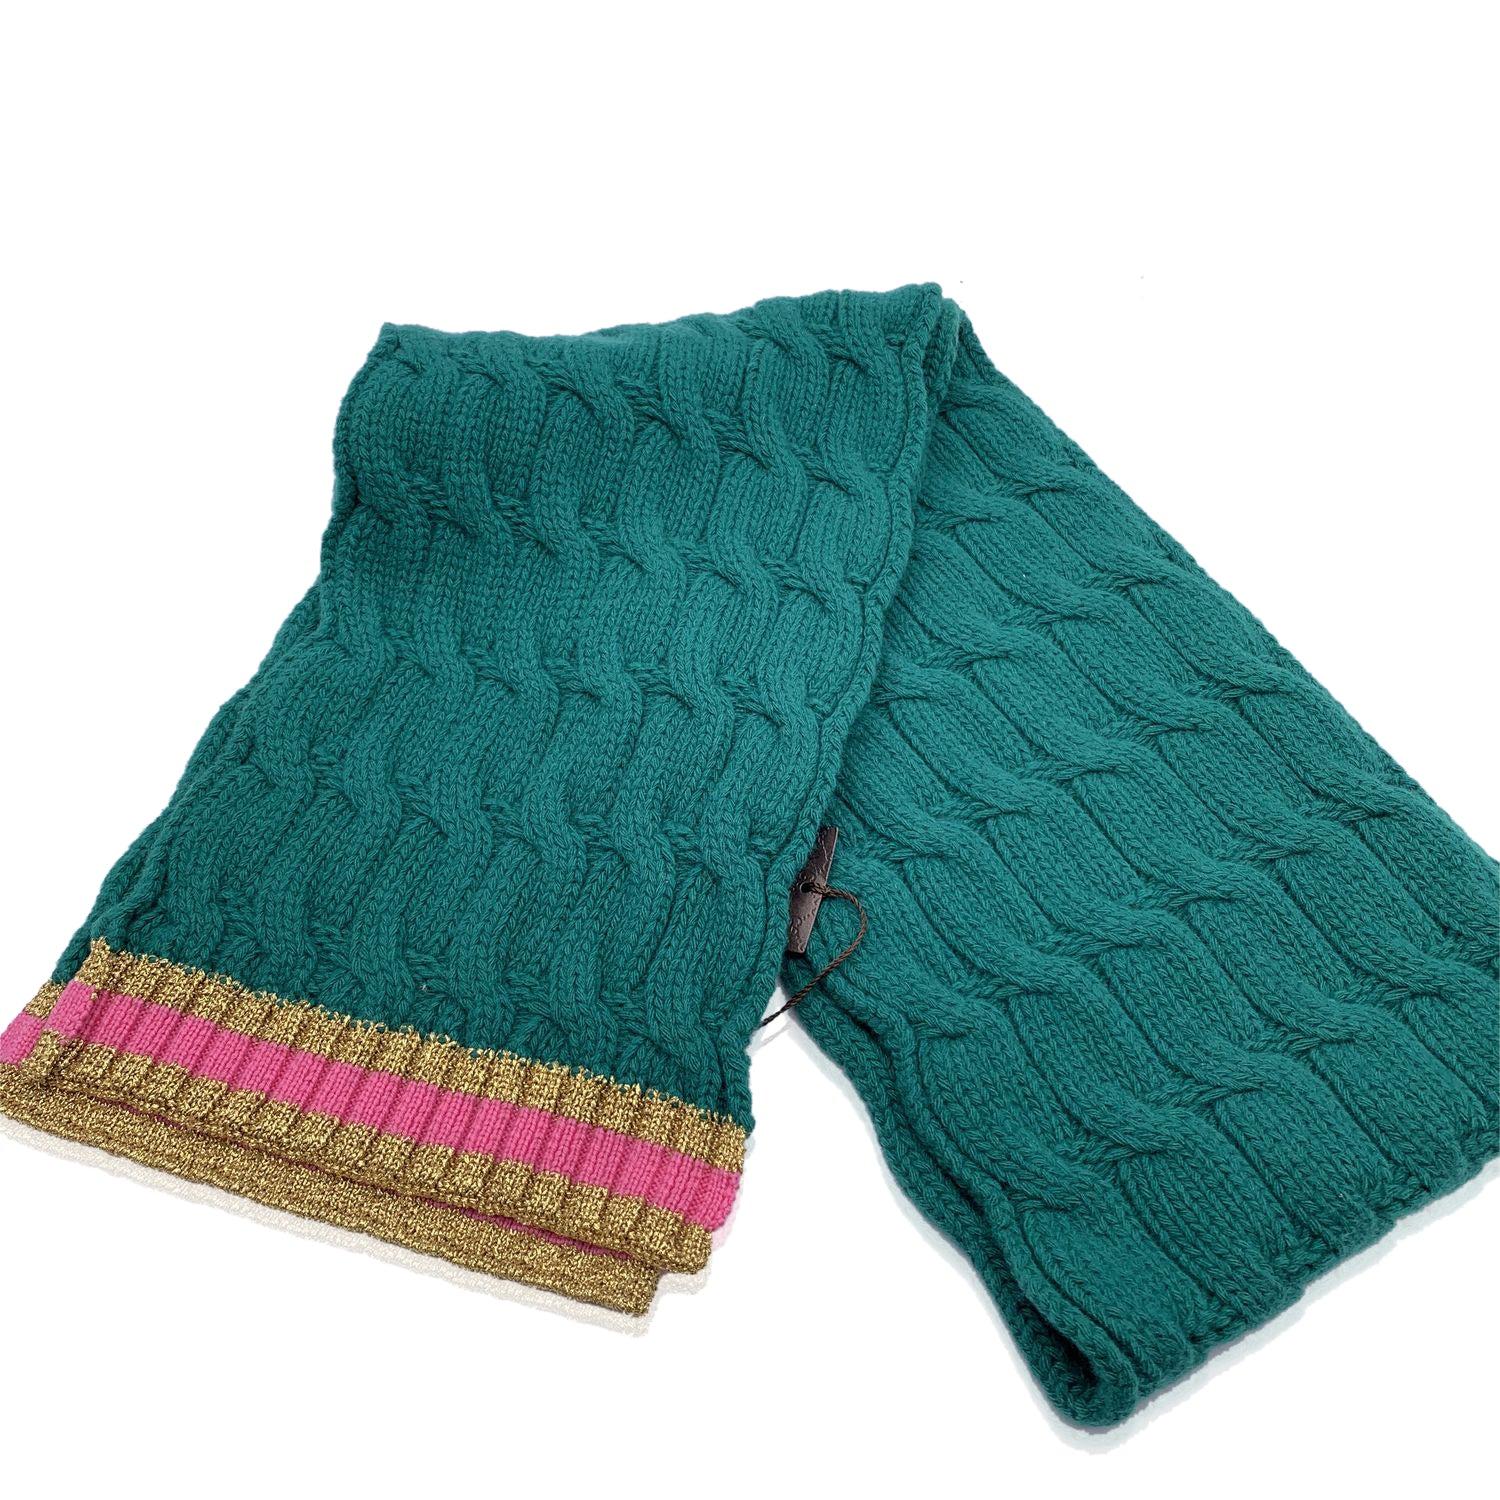 Gucci green cable knit unisex scarf with pink and gold striped hem. Composition: 71% Wool, 27% Cashmere, 1% Polyamide. Made in Italy. Length: 180 cm. Width: 25 cm Details MATERIAL: Wool COLOR: Green MODEL: n.a. GENDER: Unisex Adults COUNTRY OF